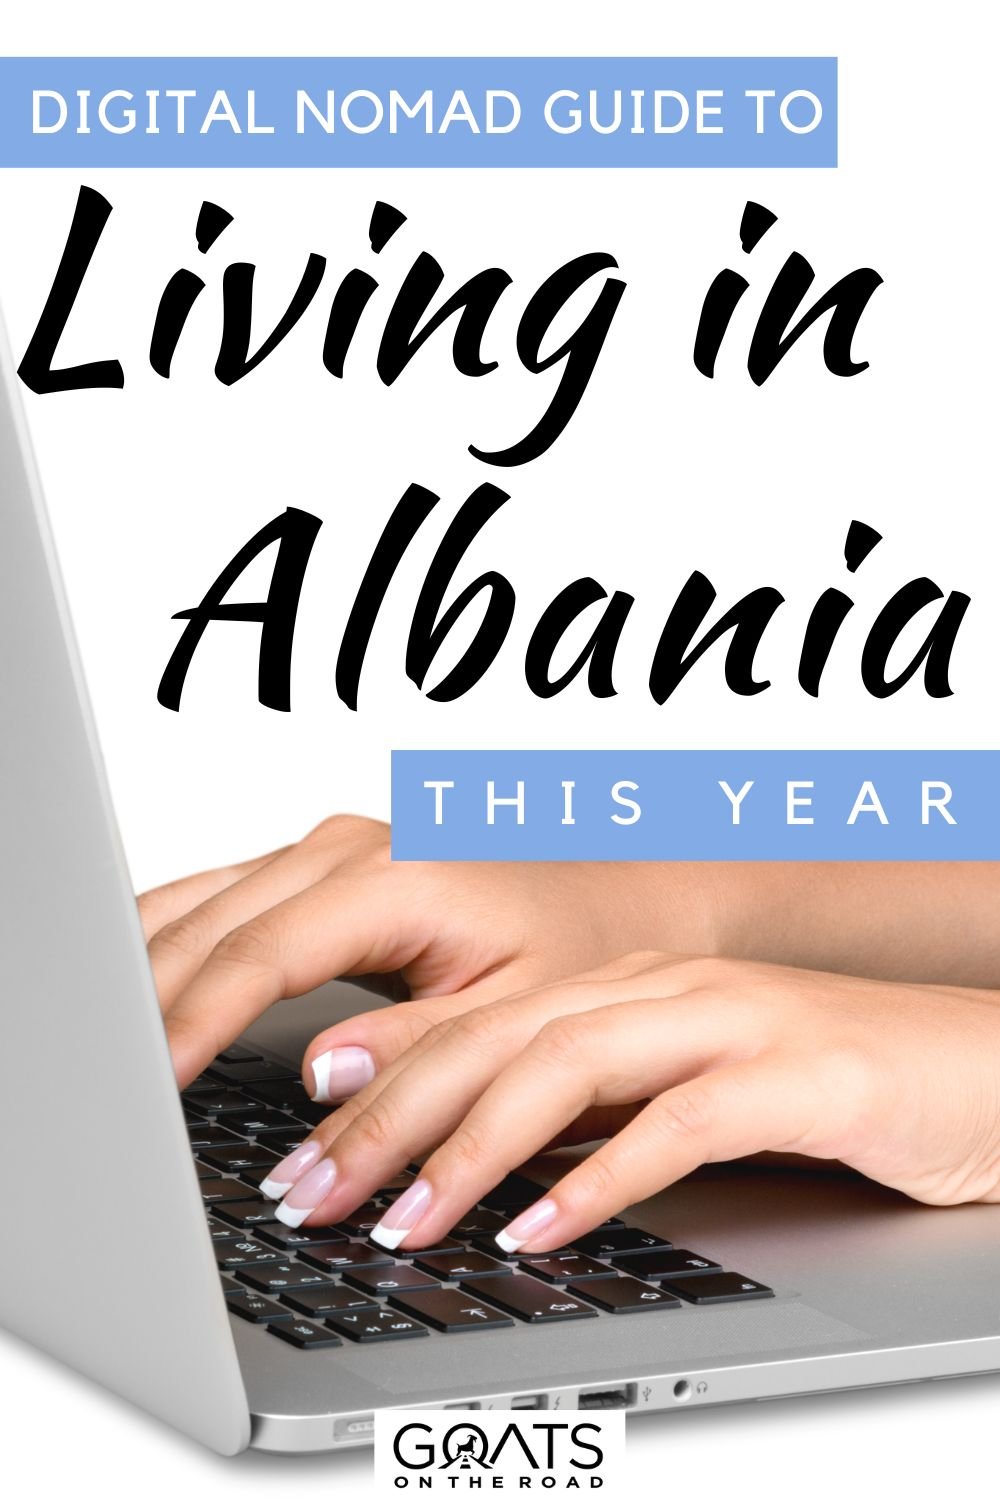 “Digital Nomad Guide to Living in Albania